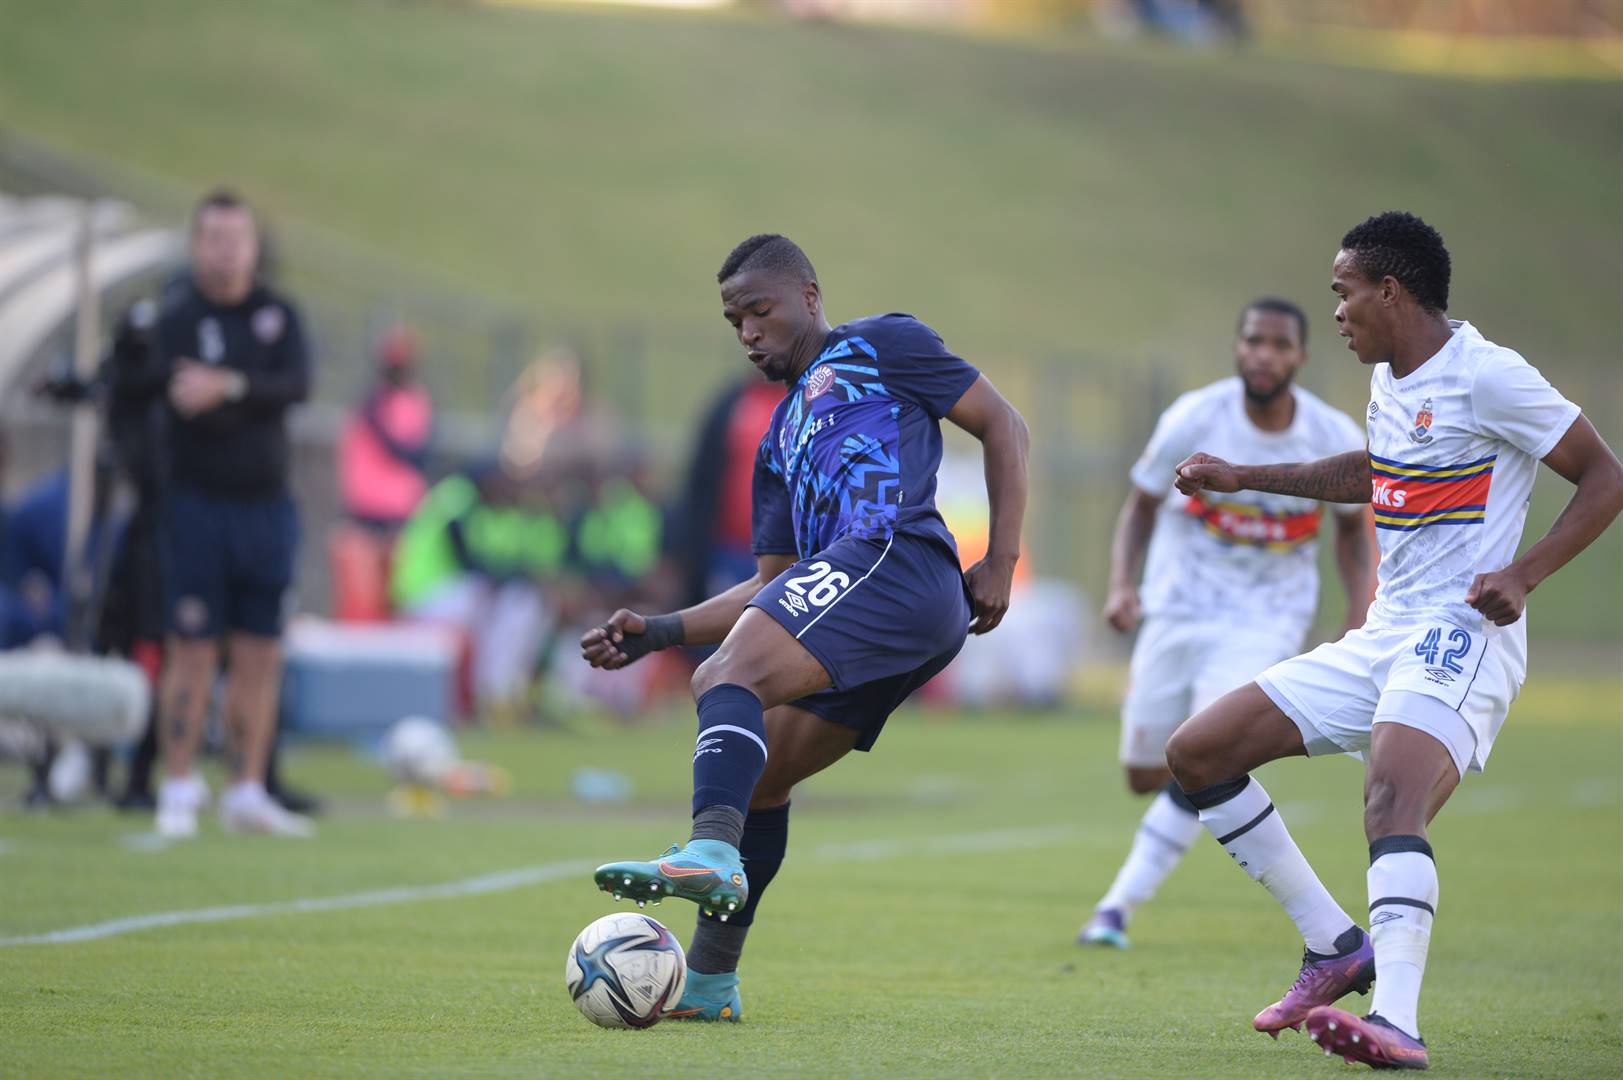 Swallows FC attacker Kagiso Malinga and Aupa Moeketsi of University of Pretoria are likely to cross paths in their make or break PSL Promotion Play-off game today. Photo: Lefty Shivambu/Gallo Images